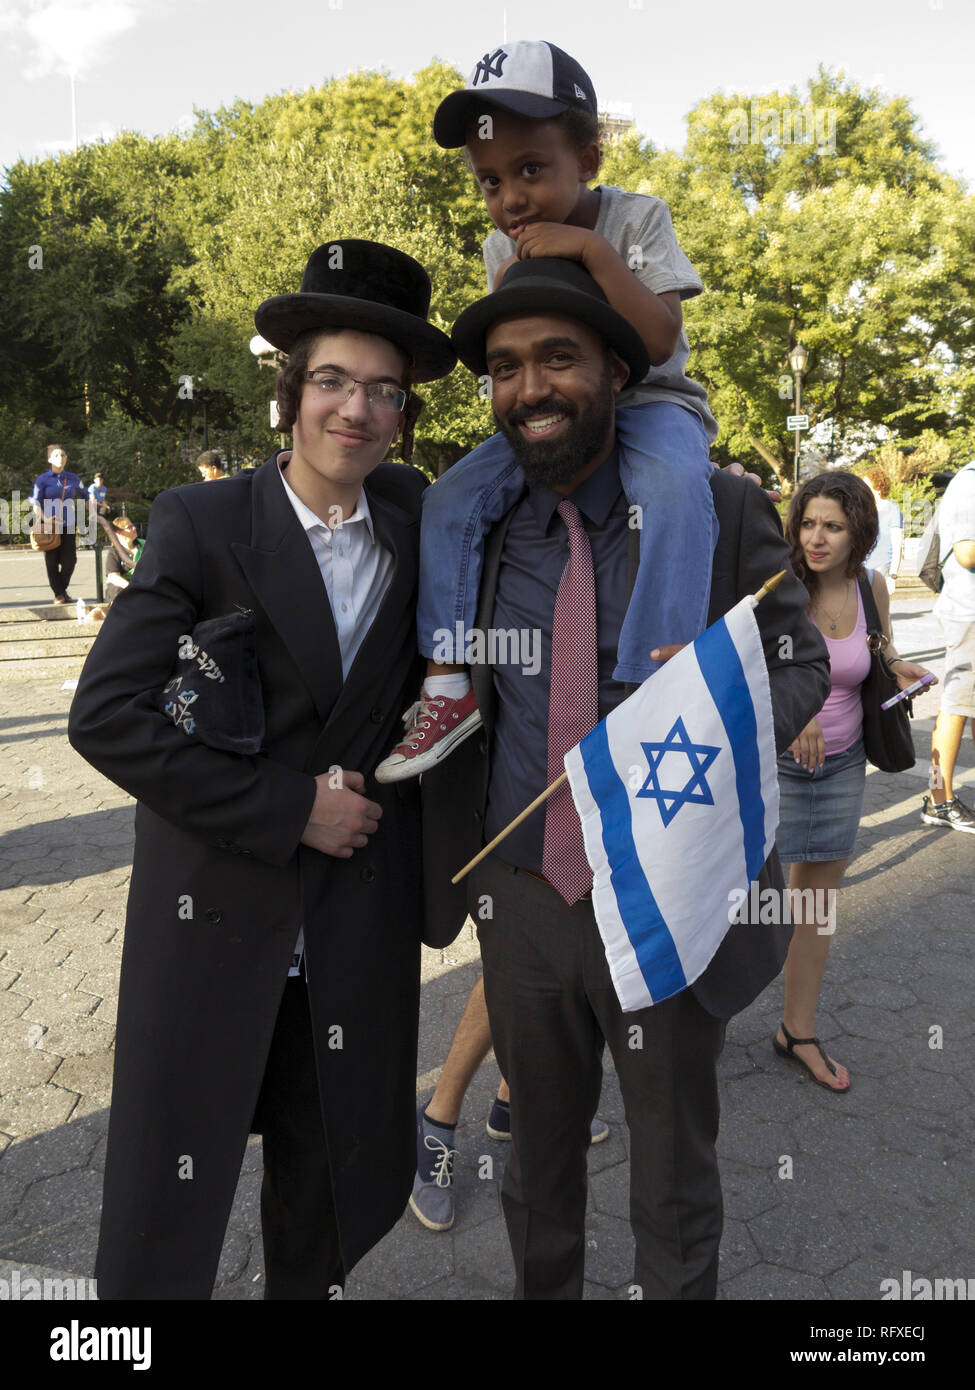 Ethiopian Jew from Israel and son pose for photo with Hasidic teen at Rally in Support of Israel and Persecuted Religious Minorities under Islam at Un Stock Photo